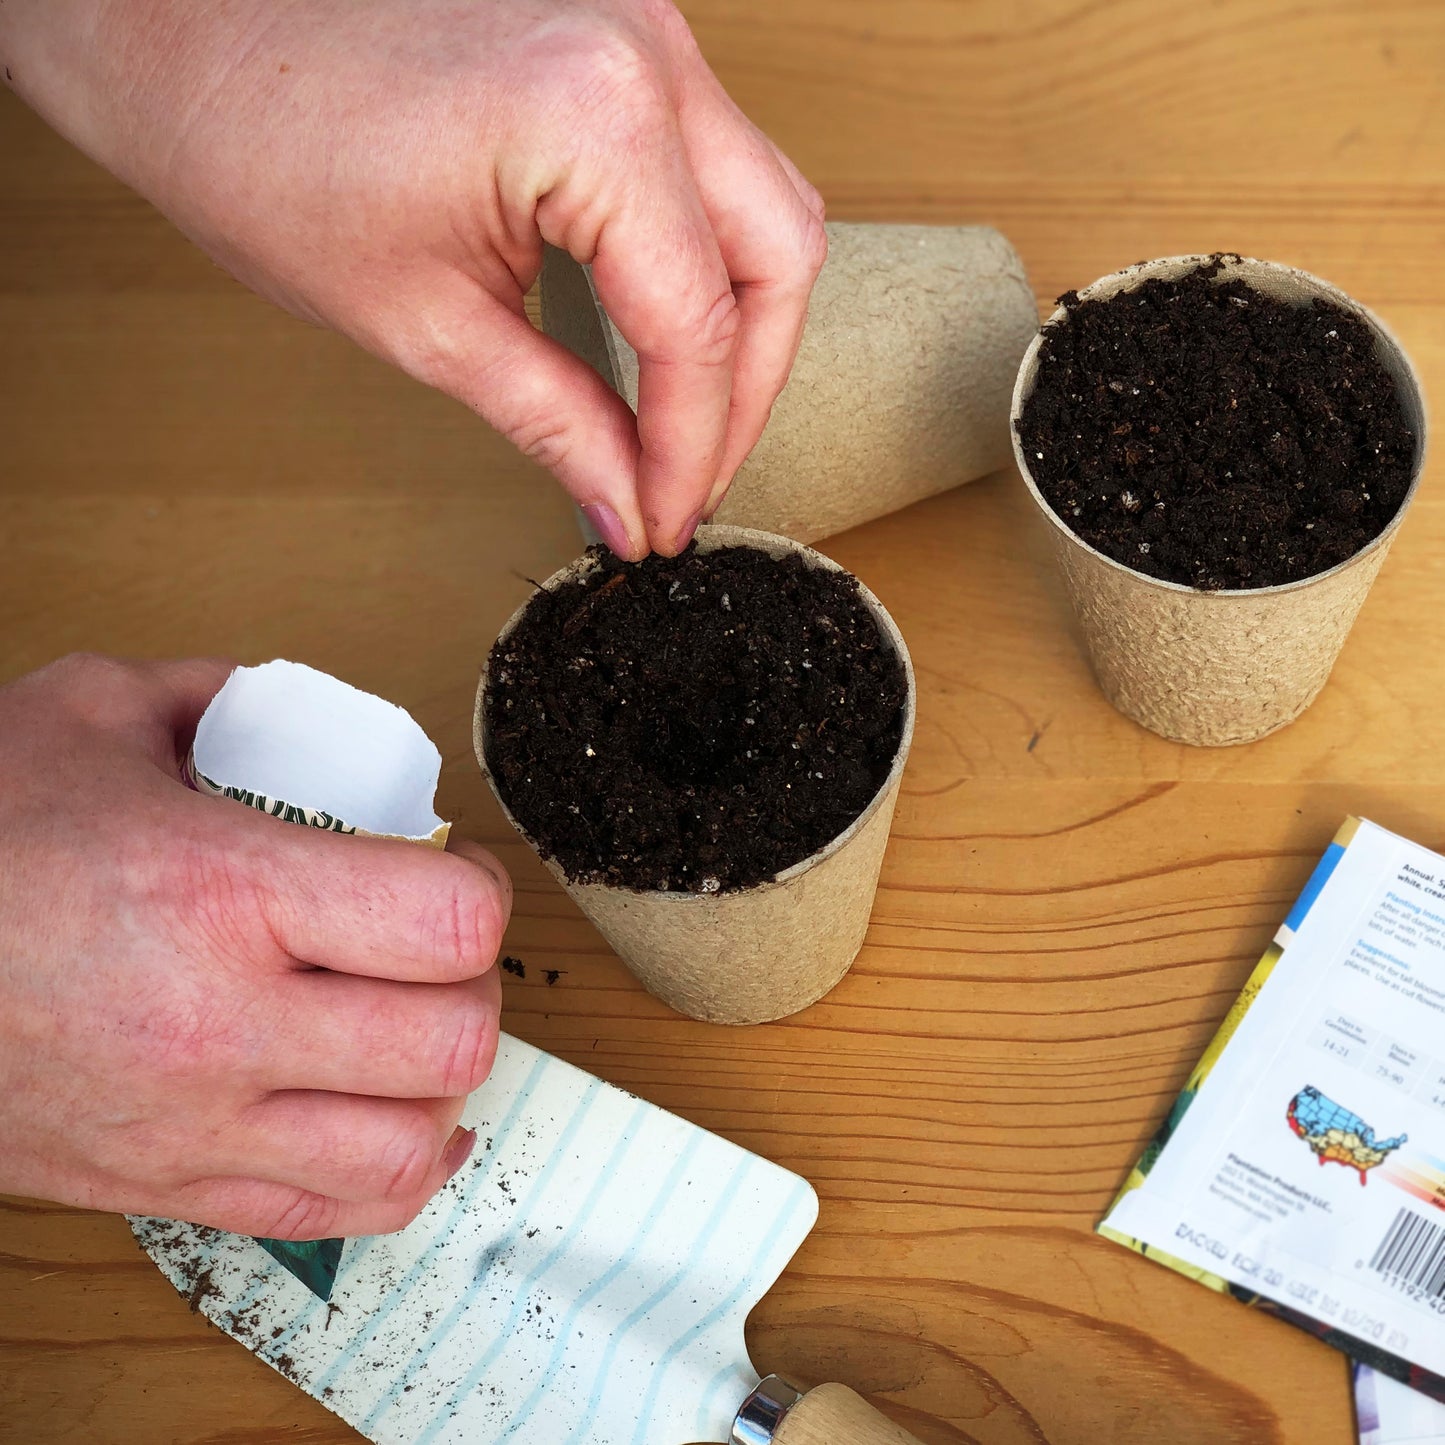 Start Better Boy Hybrid Tomato seeds in biodegradable peat pots filled with Jiffy Mix.